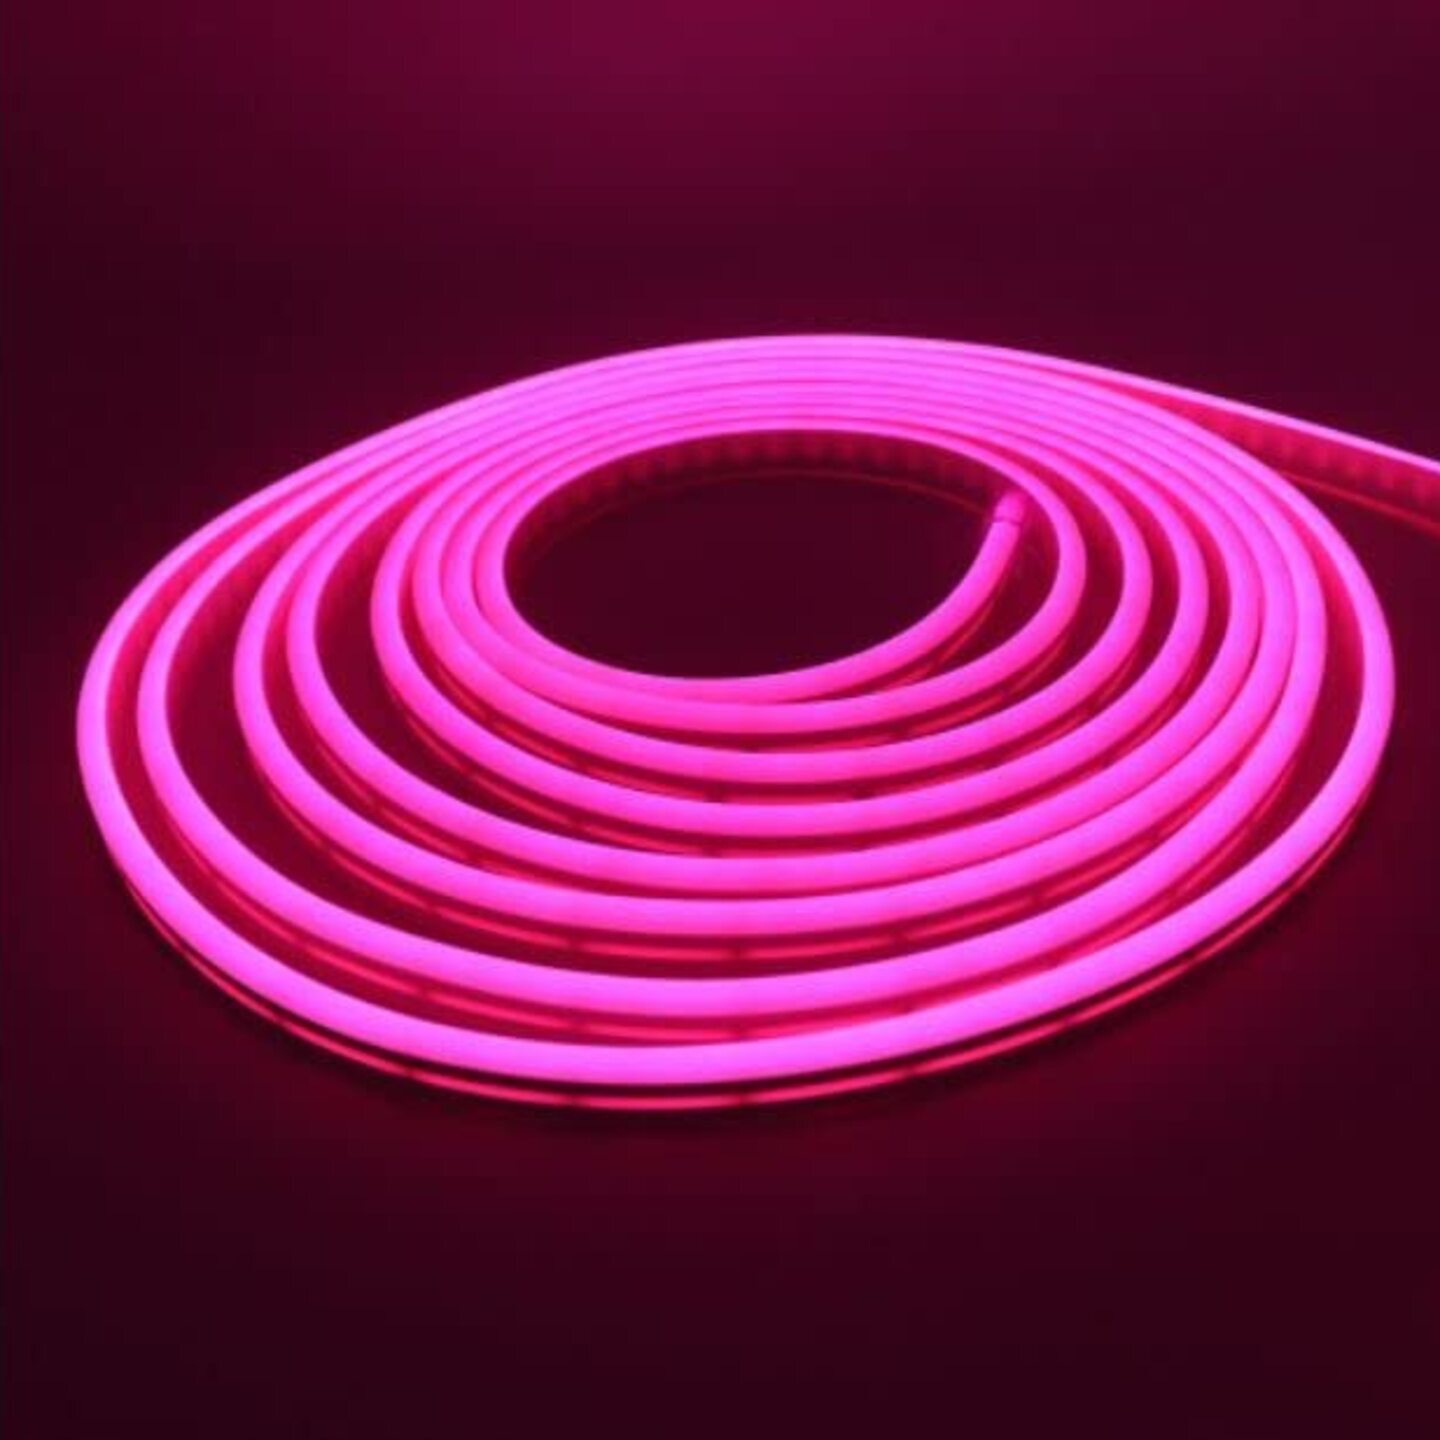 50 Meter LED Silicon Neon Rope Light Waterproof and flexible - Pink